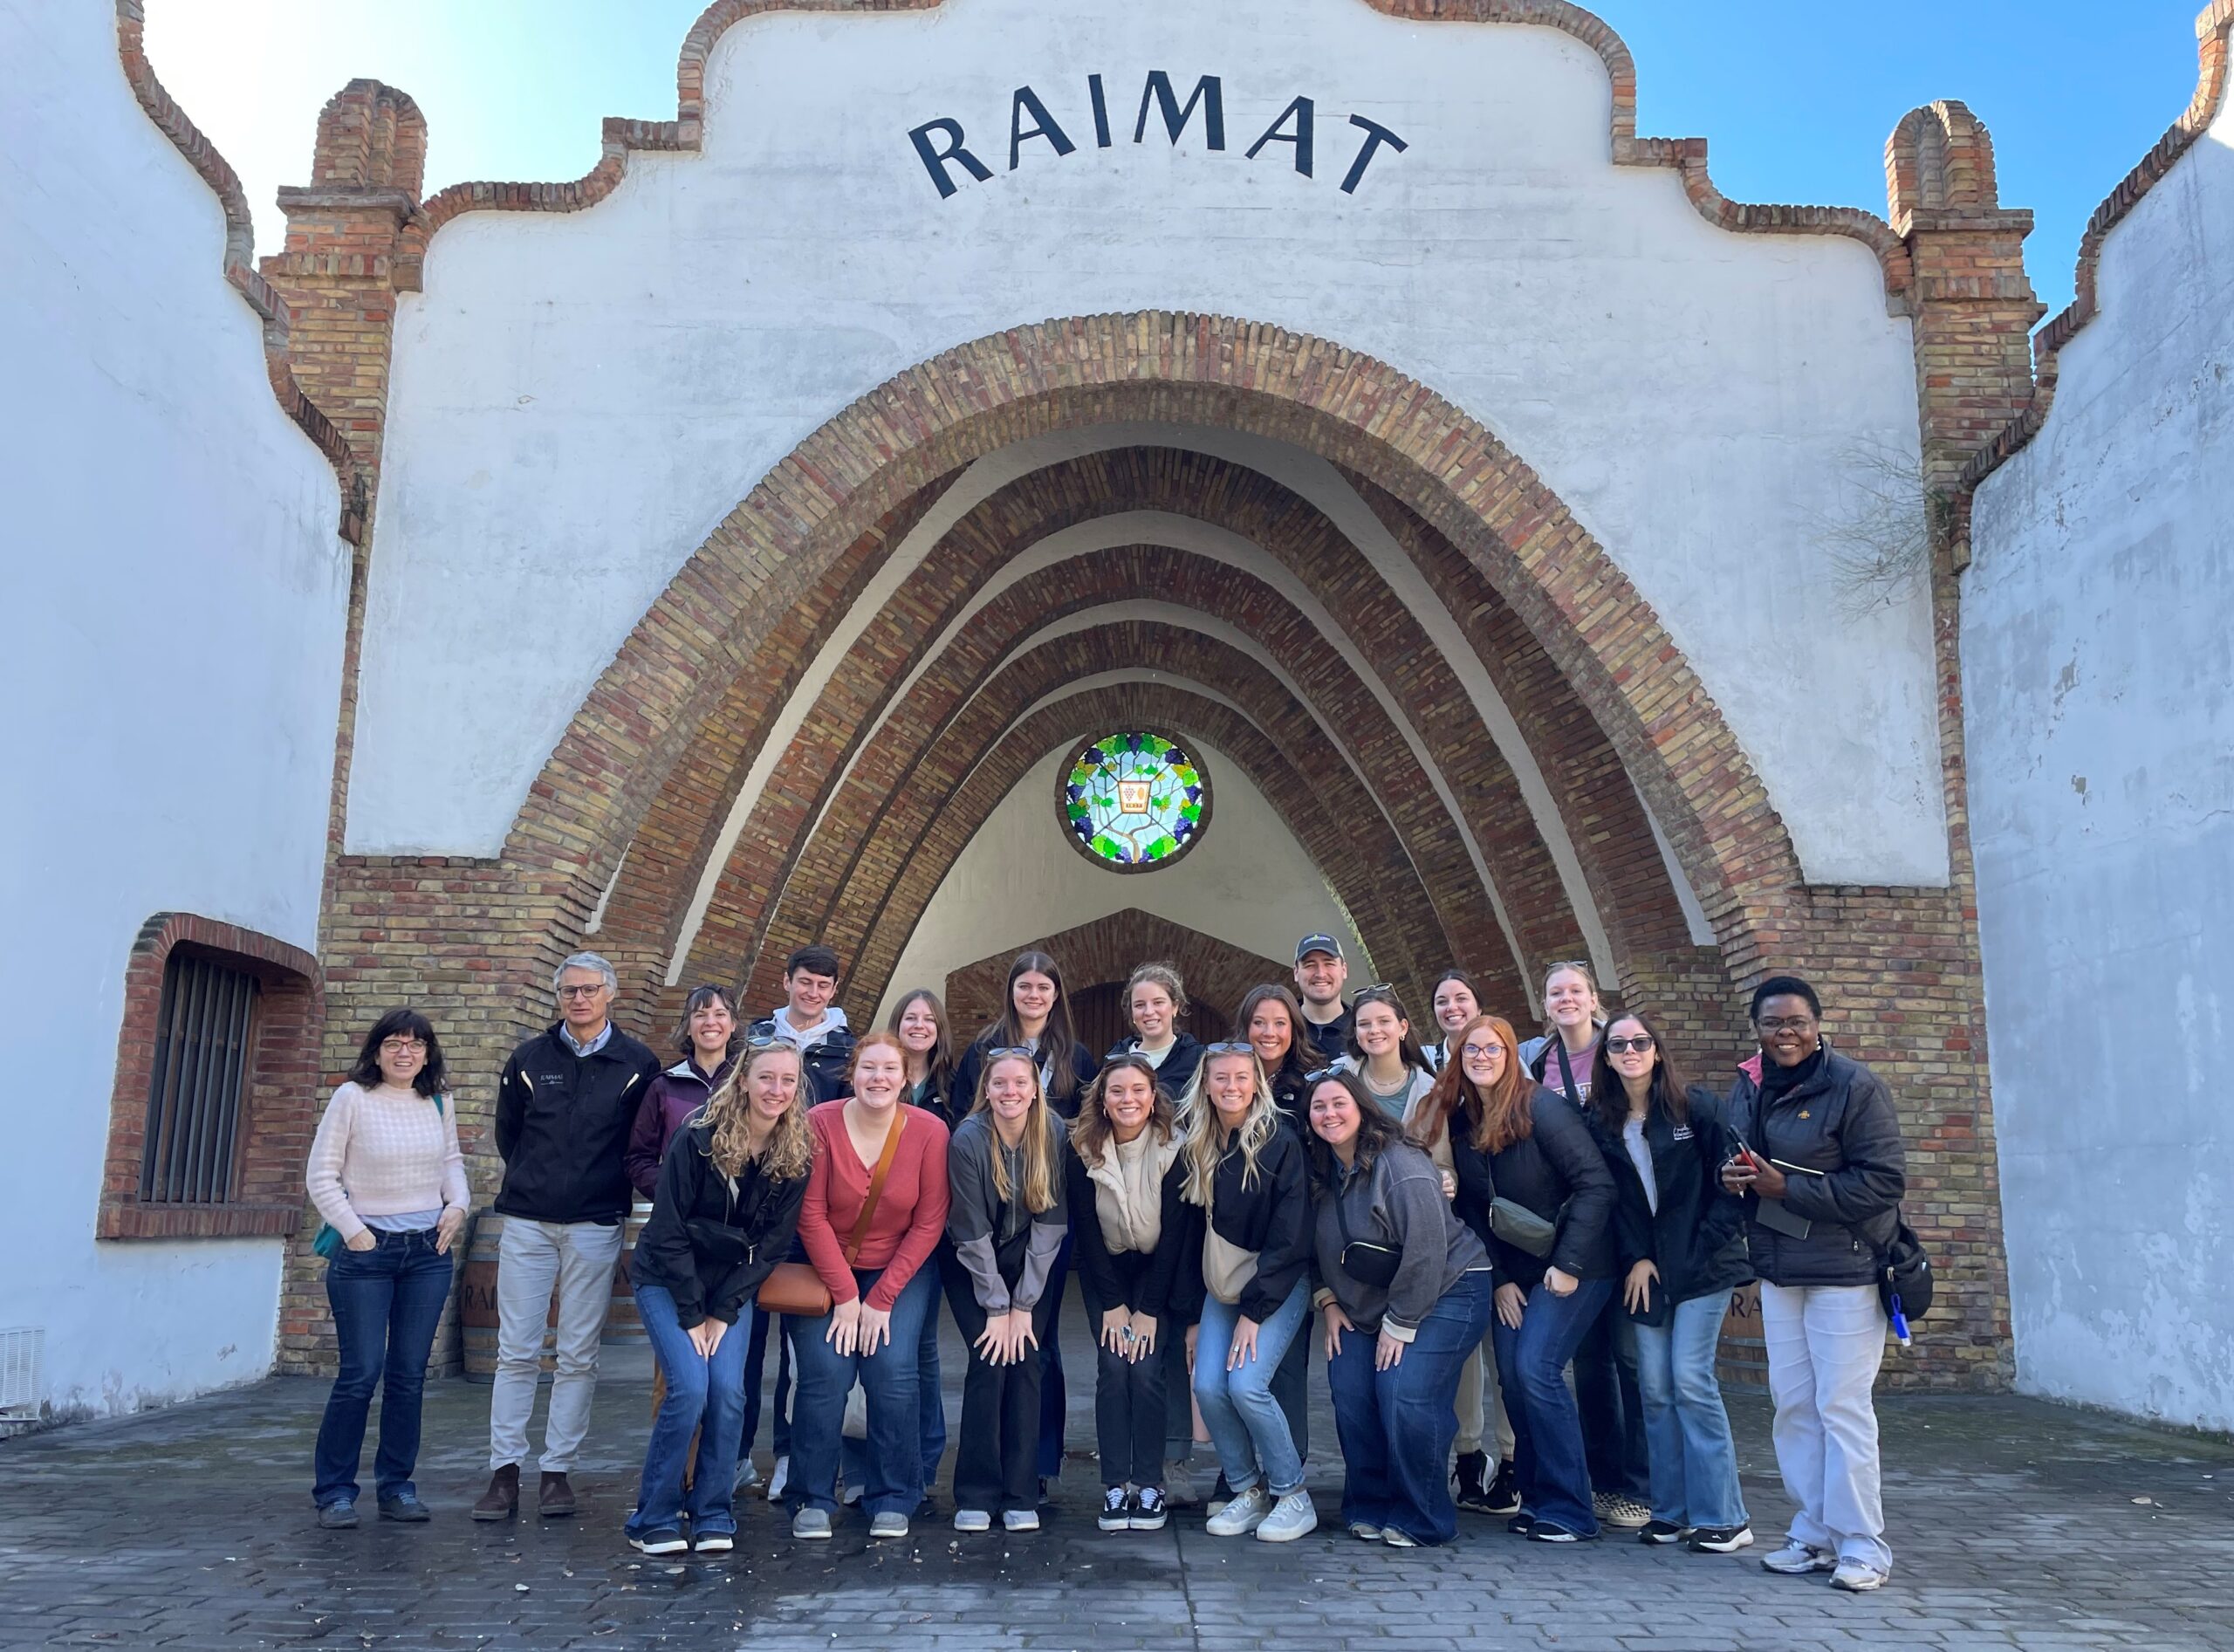 The CALS study abroad group in front of Raimat Winery in Spain.